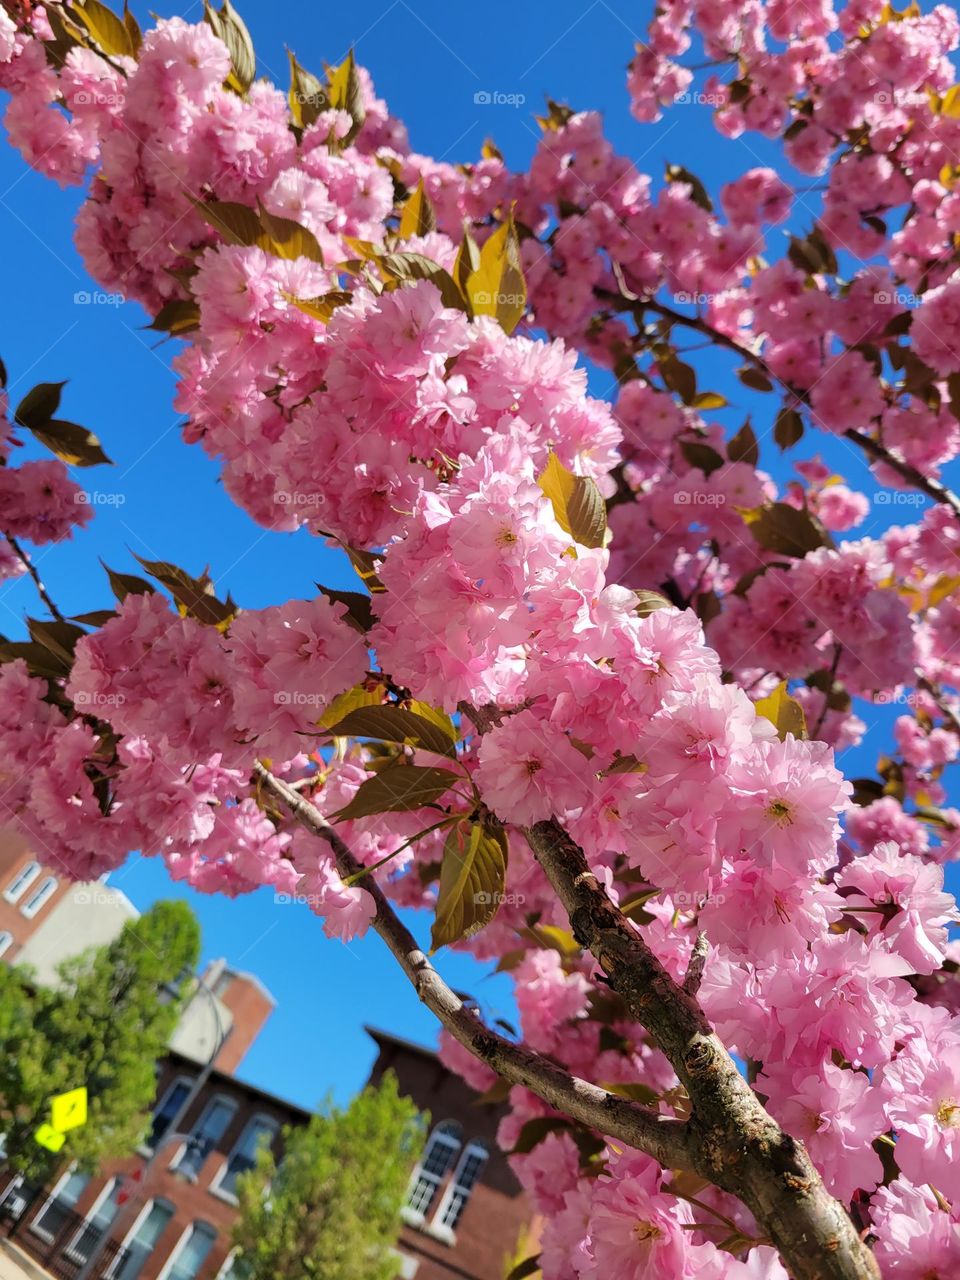 cherry blossoms in a bright blue sky